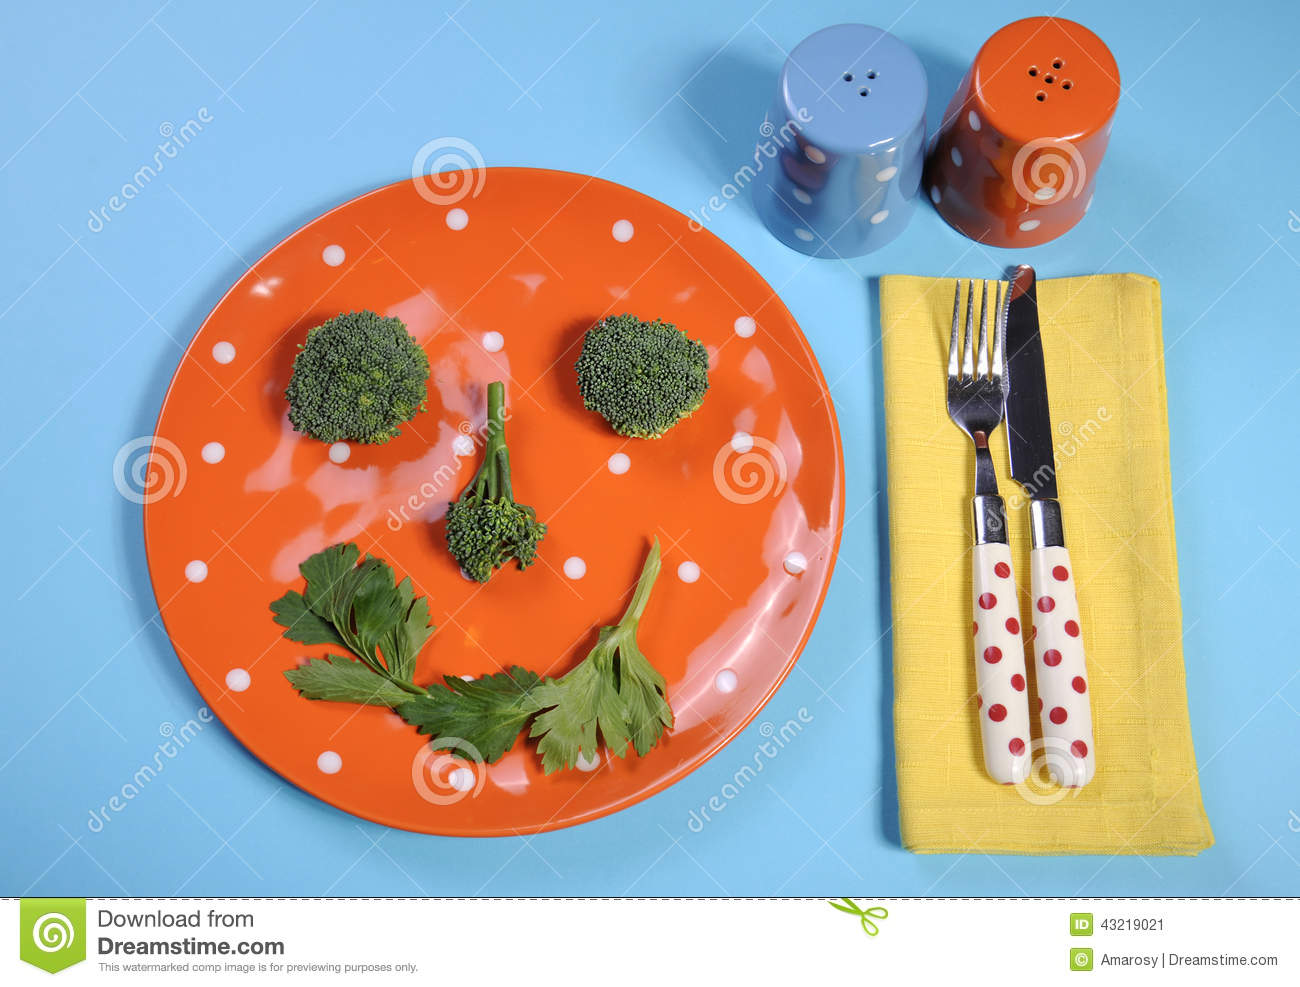 Plate With Salt And Pepper Shakers And Colorful Cutlery On A Pale